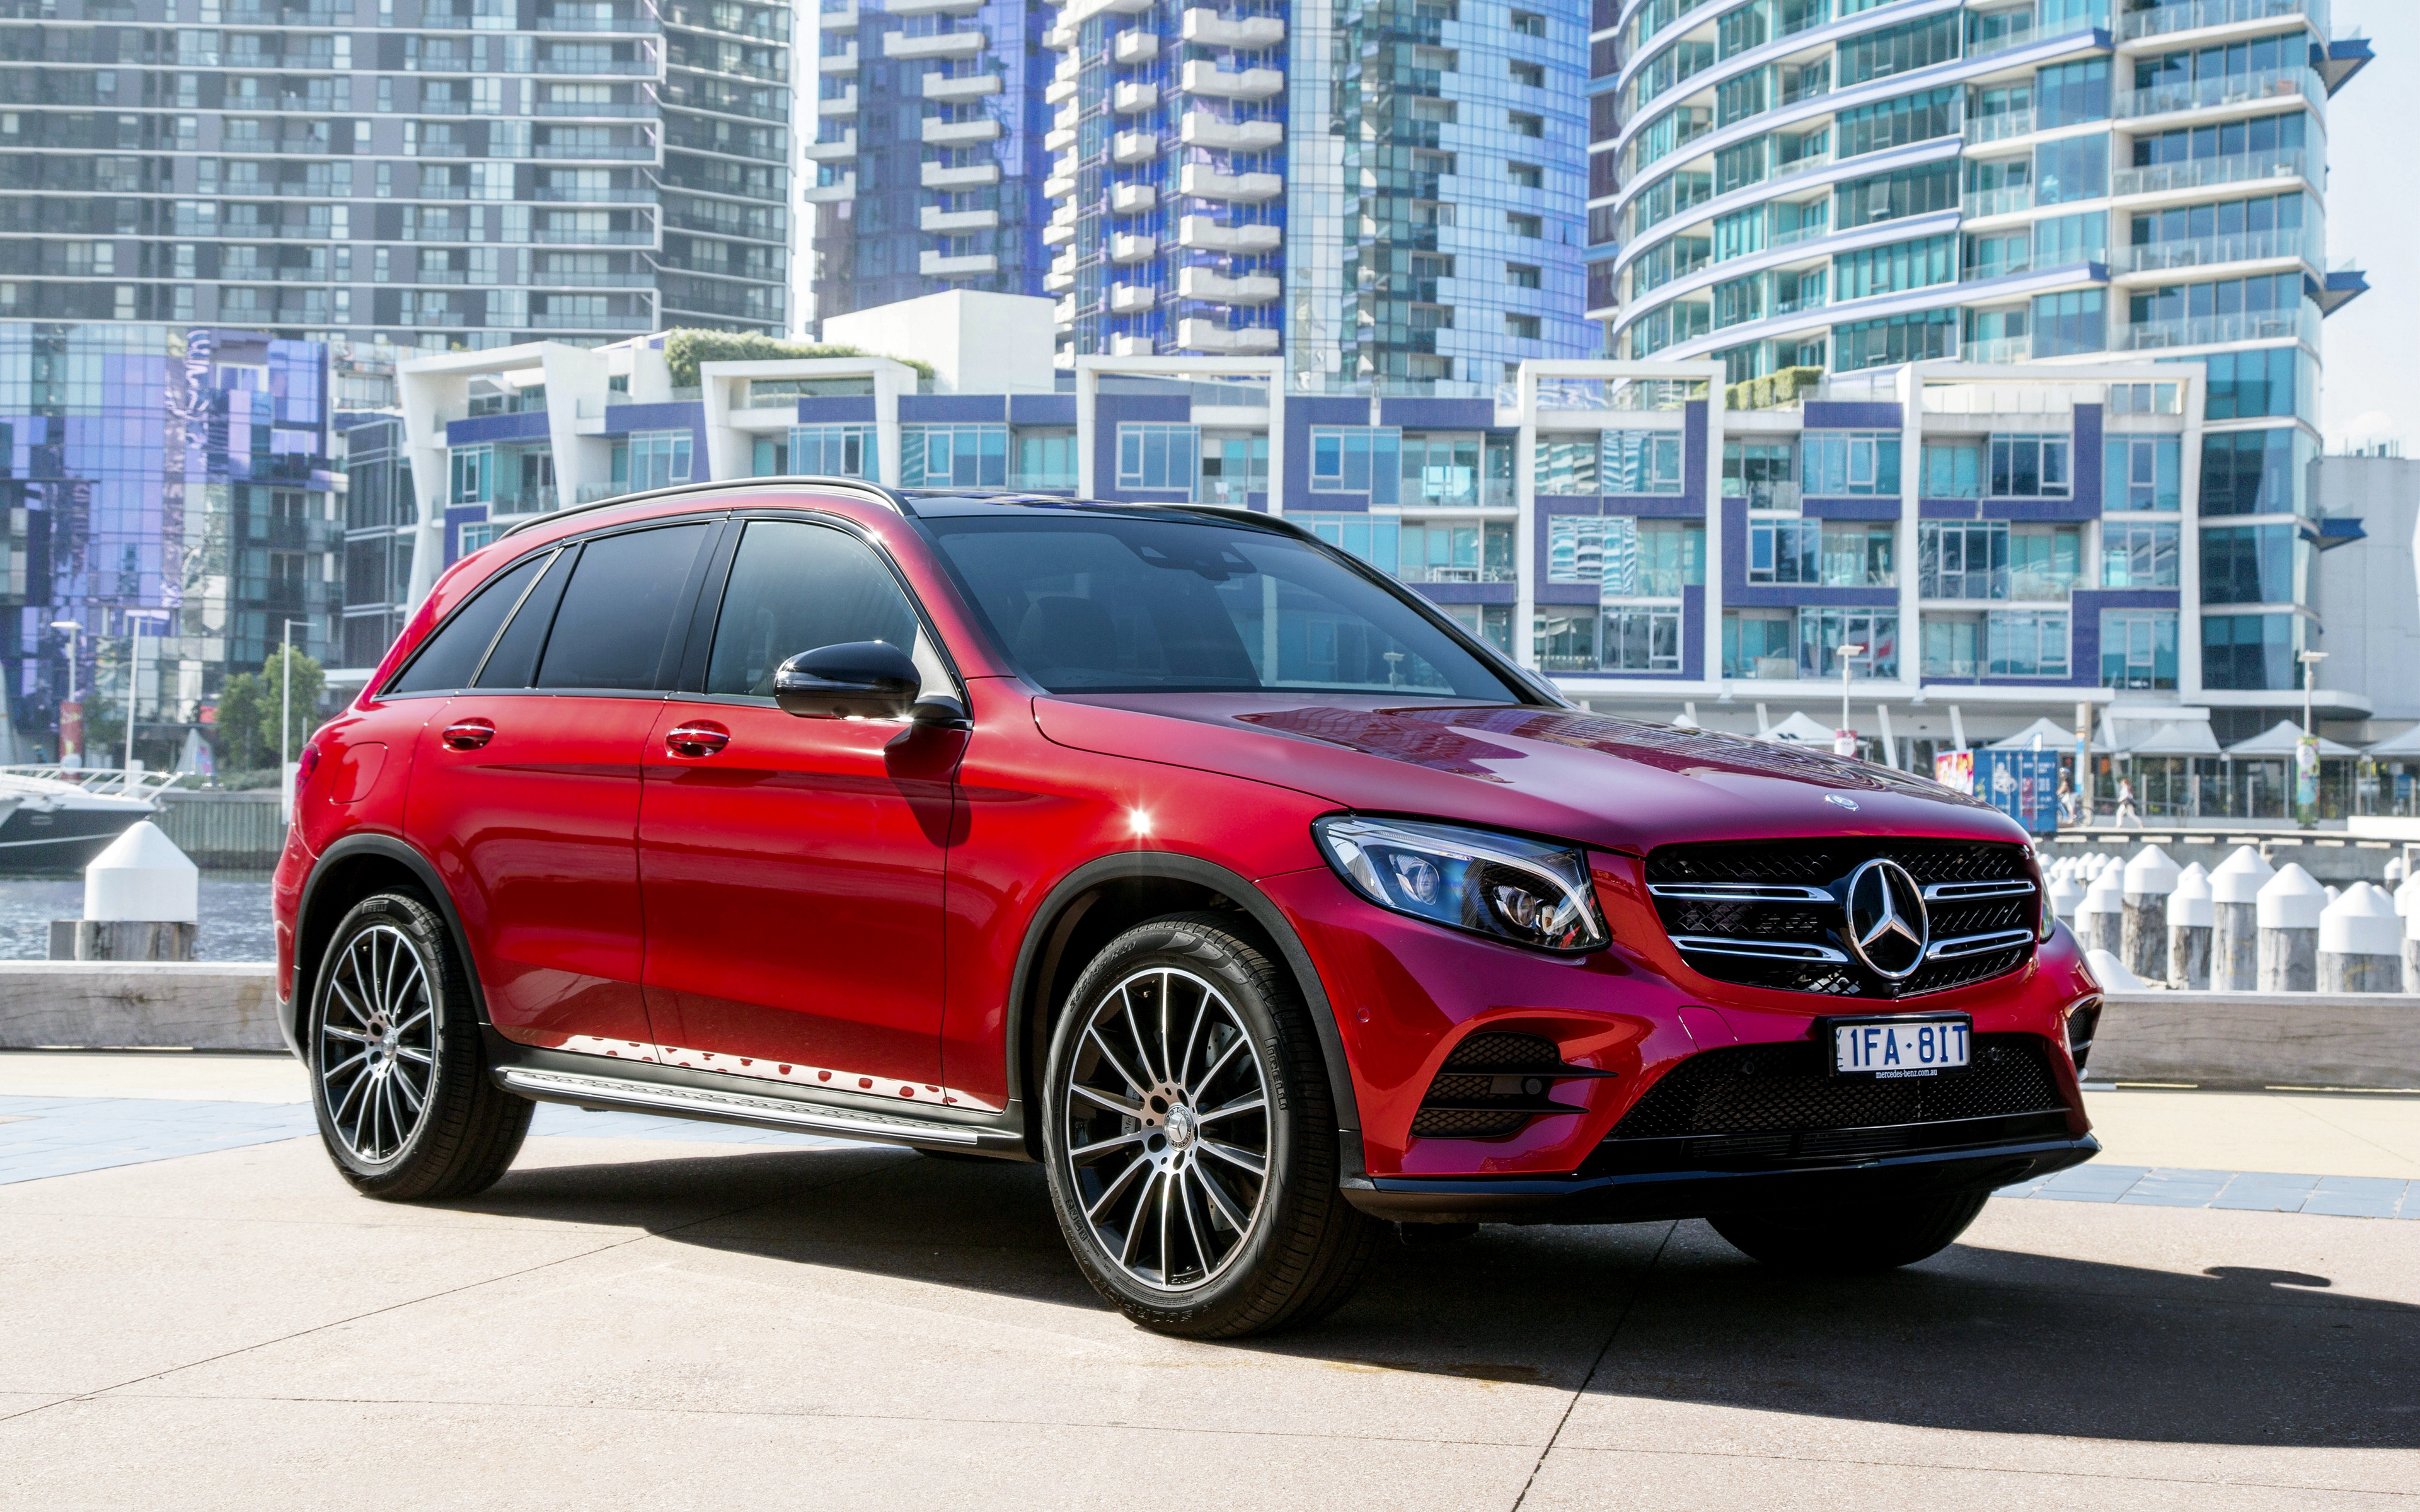 General 3840x2400 car red cars Mercedes-Benz vehicle German cars SUV